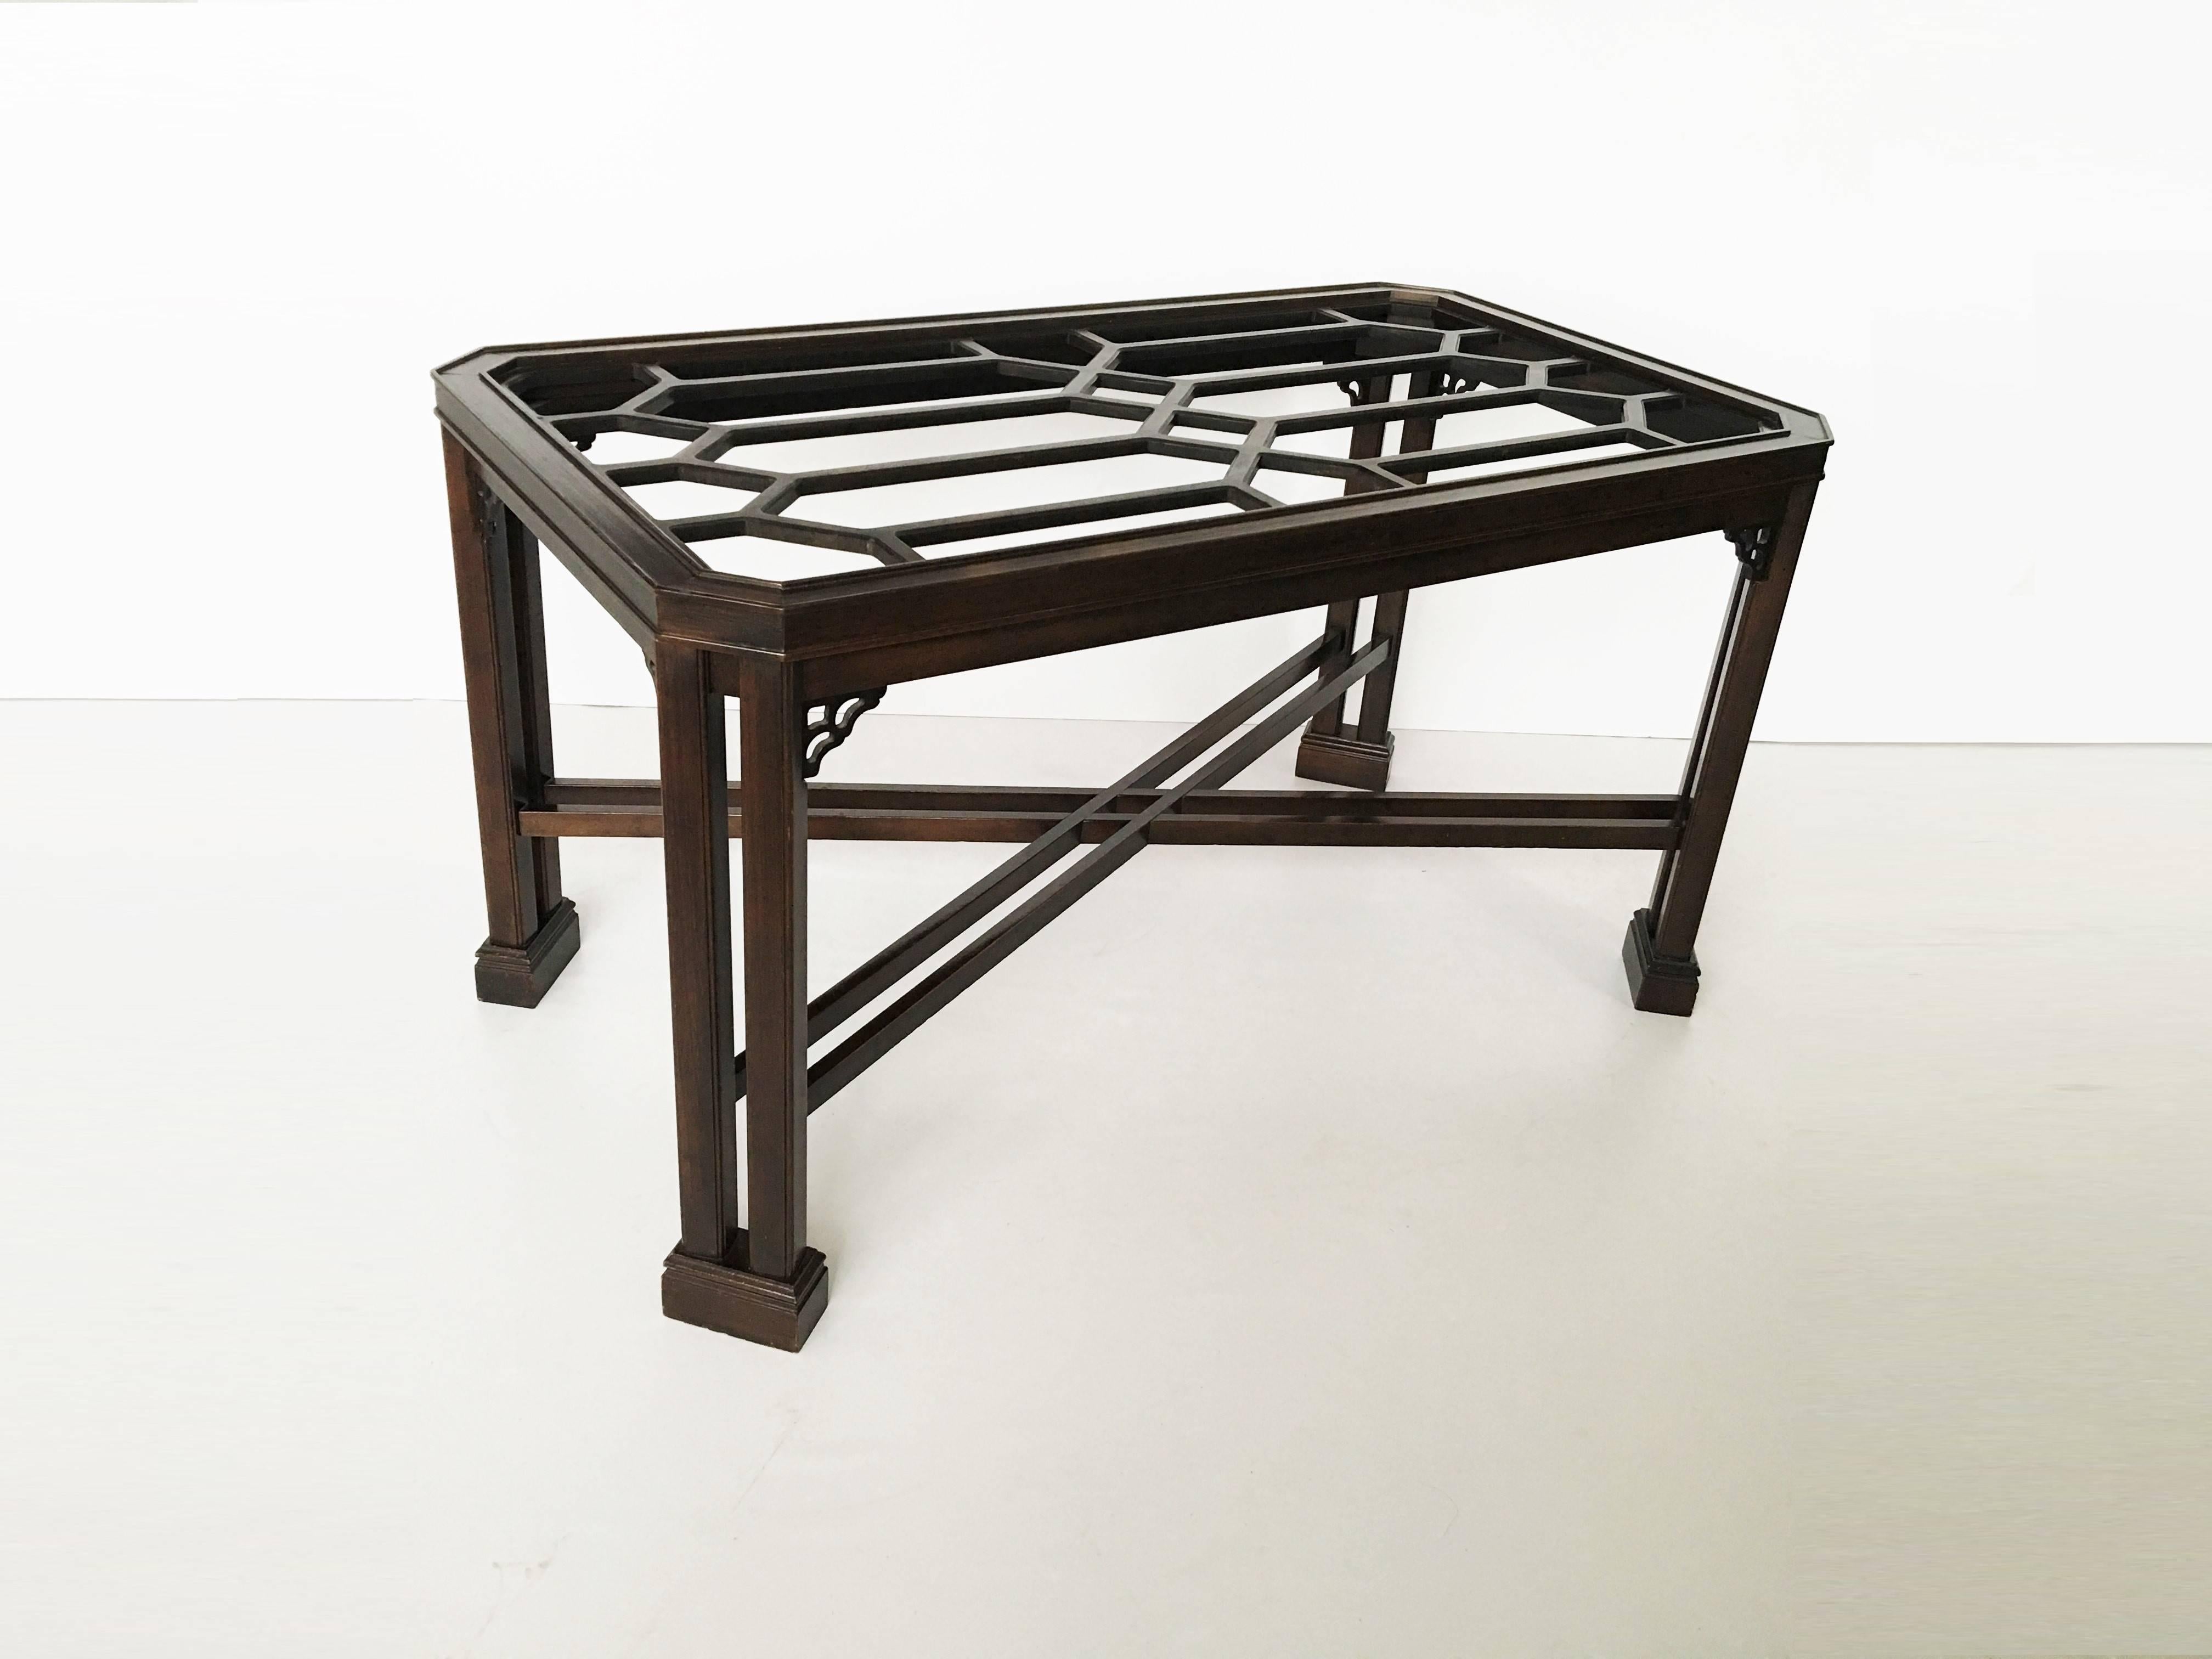 Wonderful Chinese Chippendale dining table.

Table base size: 29.5 in. Height x 55.5 in. Width x 30.5 in. Depth 
Glass top size: 78 in. Length x 46 in. Width x 3/4 in. Thick 